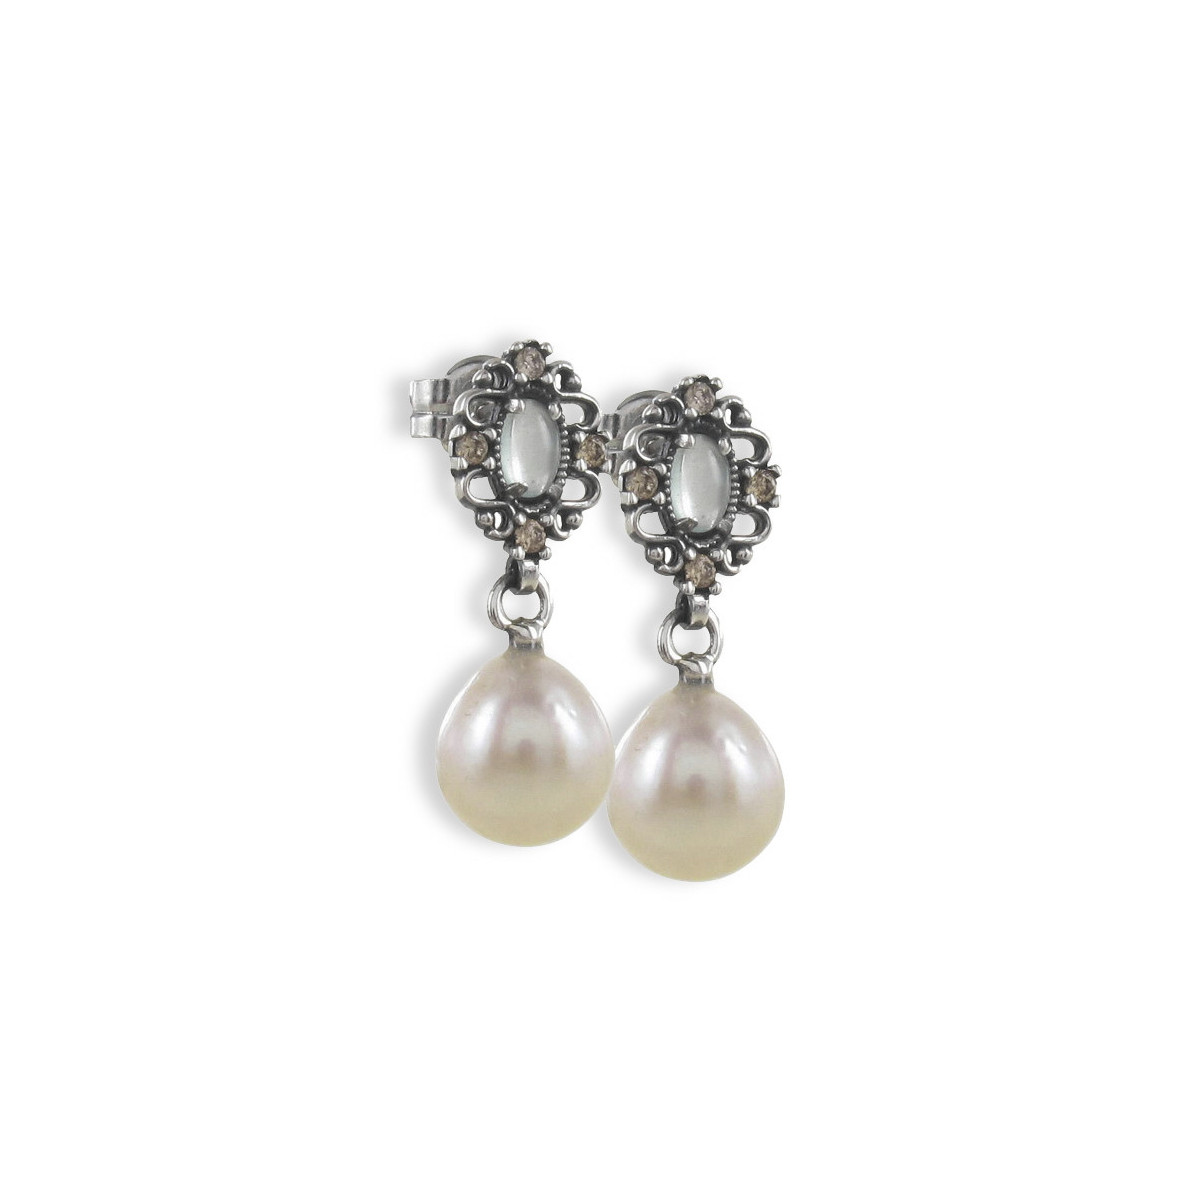 SILVER EARRINGS WITH PEARL AND OVAL CHALCEDONY